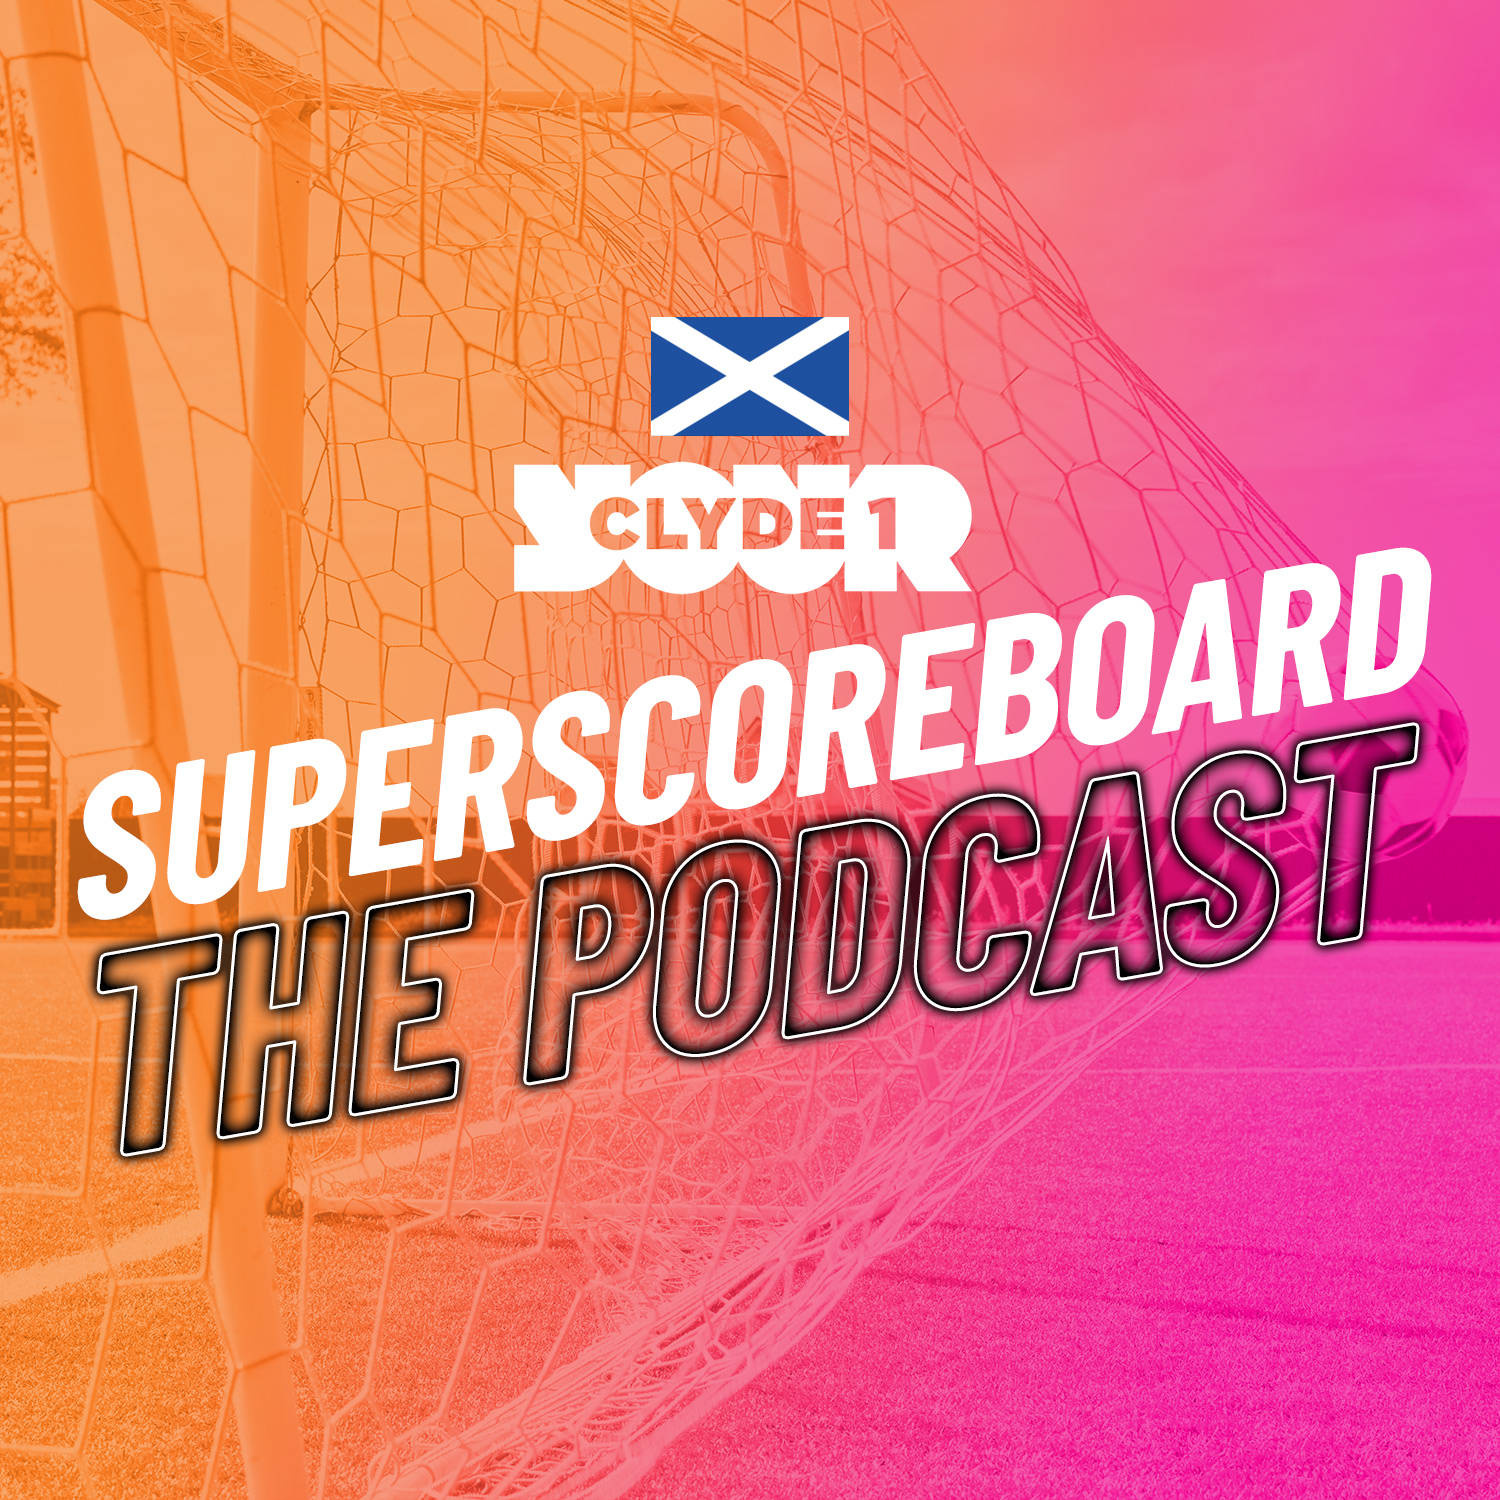 Friday 9th February Clyde 1 Superscoreboard